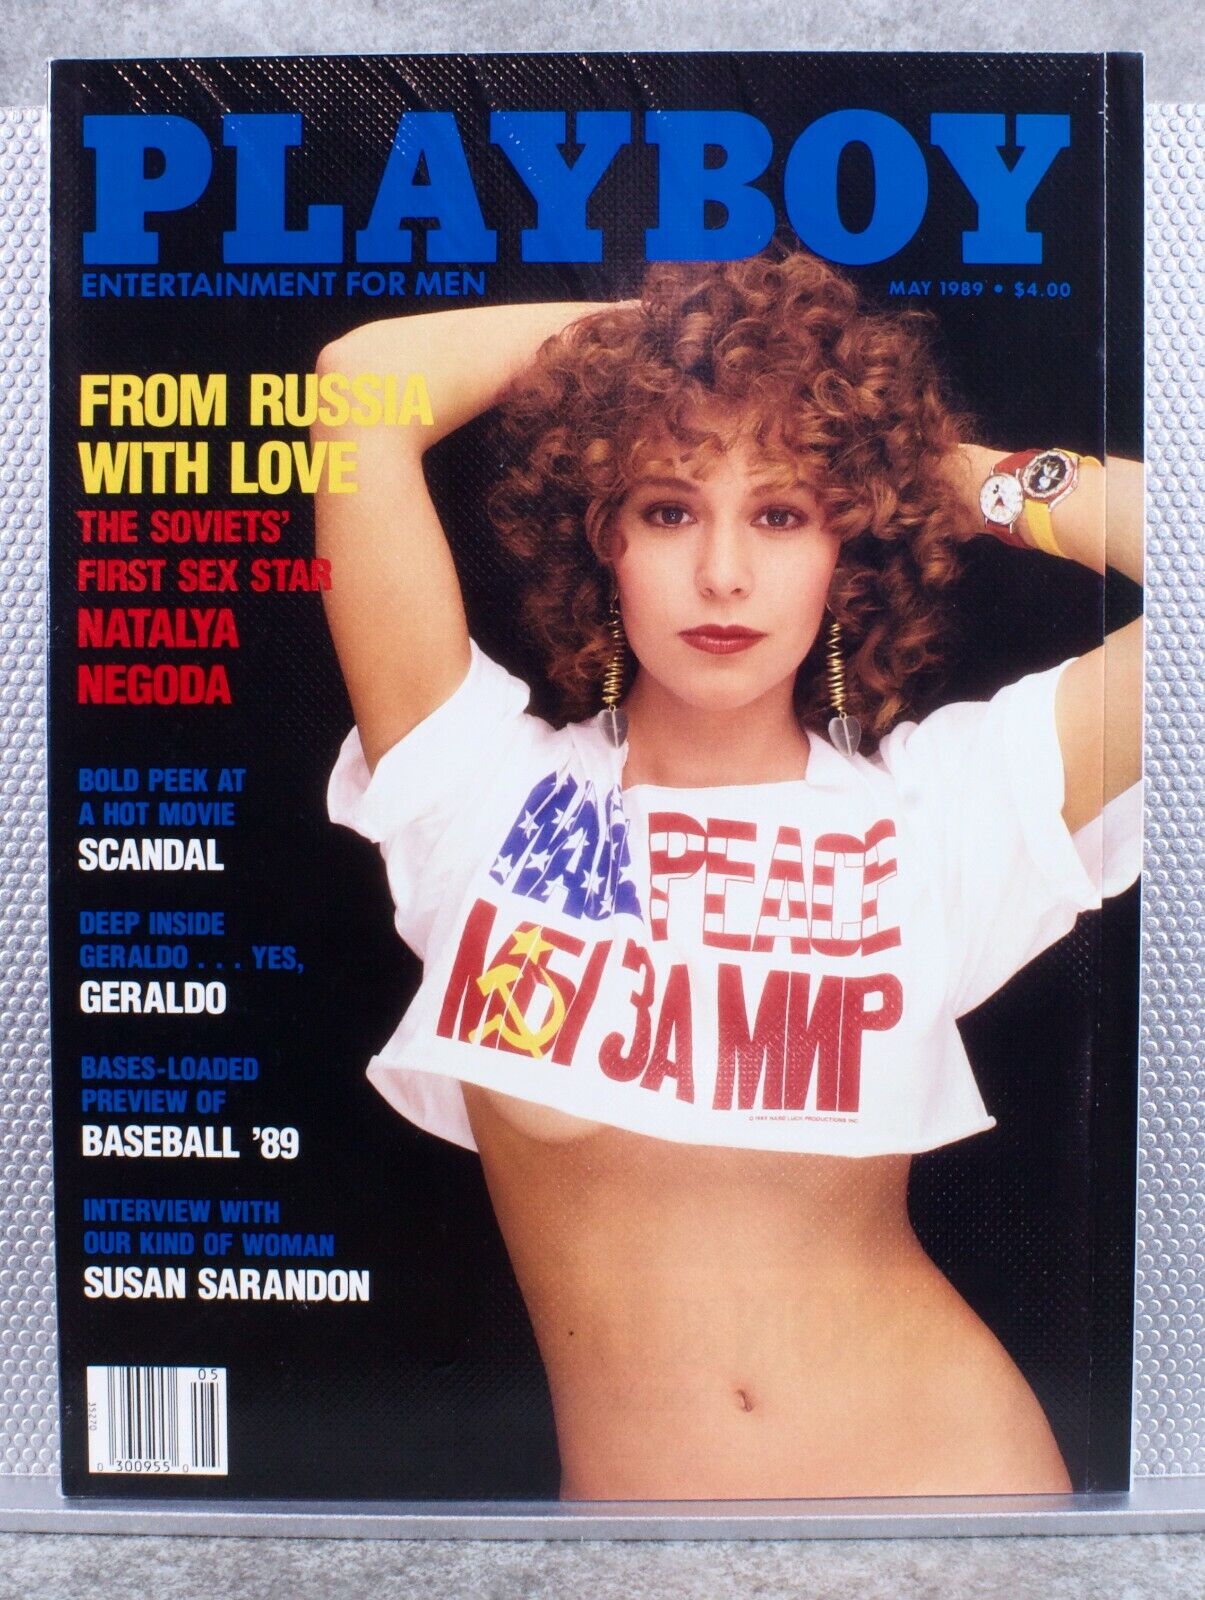 andrea bohmer recommends susan sarandon in playboy pic